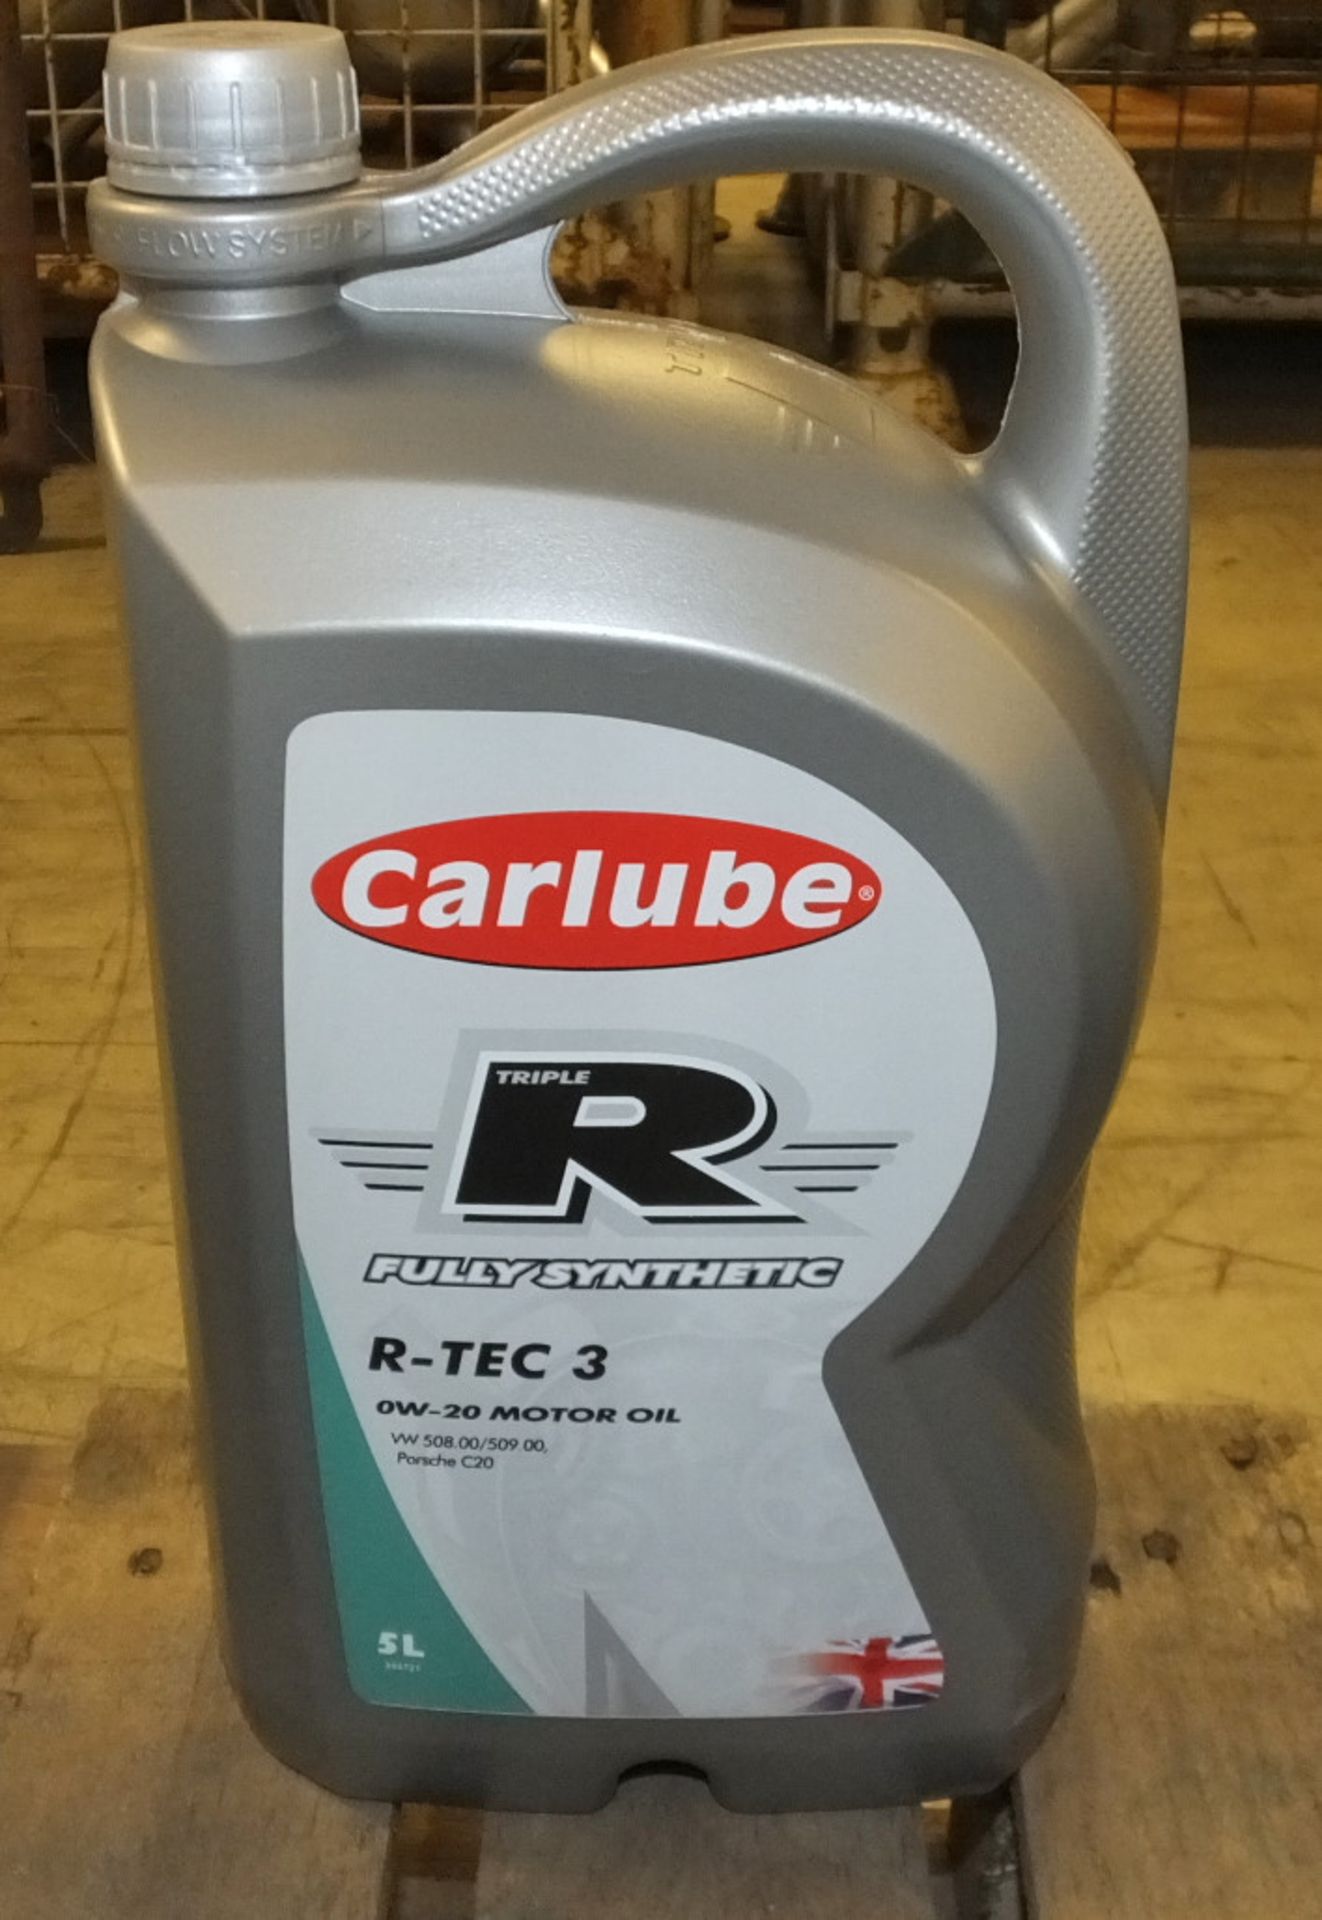 1x Carlube Triple R Semi Synthetic R-Tec 31 oil - 10W-40, 1x Fully Synthetic R-Tec 7 - 0W-30 & more - Image 3 of 3